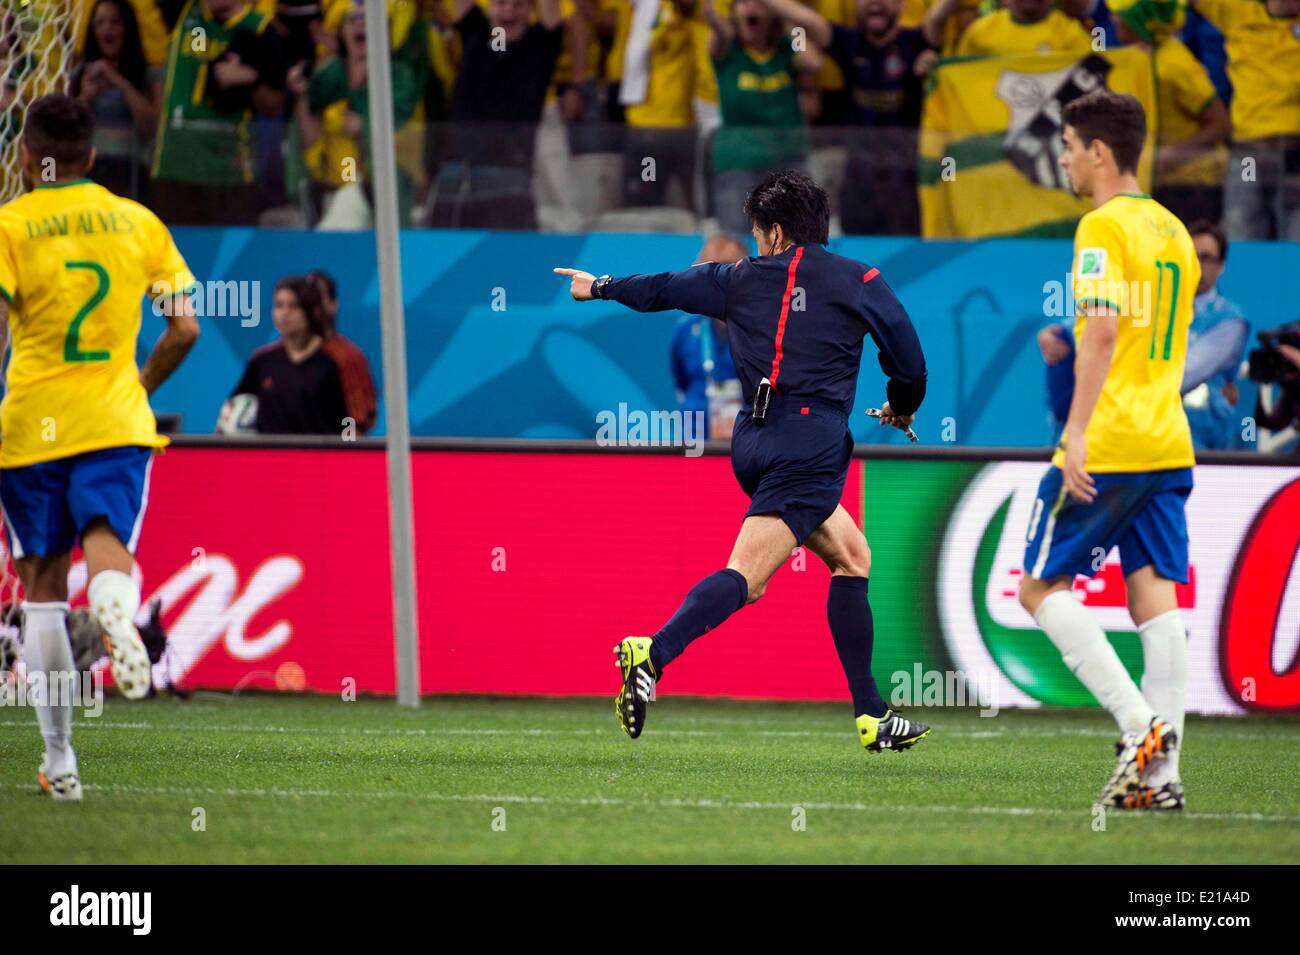 Sao Paulo, Brazil. 12th June, 2014. Yuichi Nishimura (Referee)  Japan's referee Yuichi Nishimura points at the penalty spot after Brazil's Fred was fouled inside the area during the FIFA World Cup Brazil 2014 Group A match between Brazil 3-1 Croatia at Arena de Sao Paulo in Sao Paulo, Brazil . Credit:  Maurizio Borsari/AFLO/Alamy Live News Stock Photo